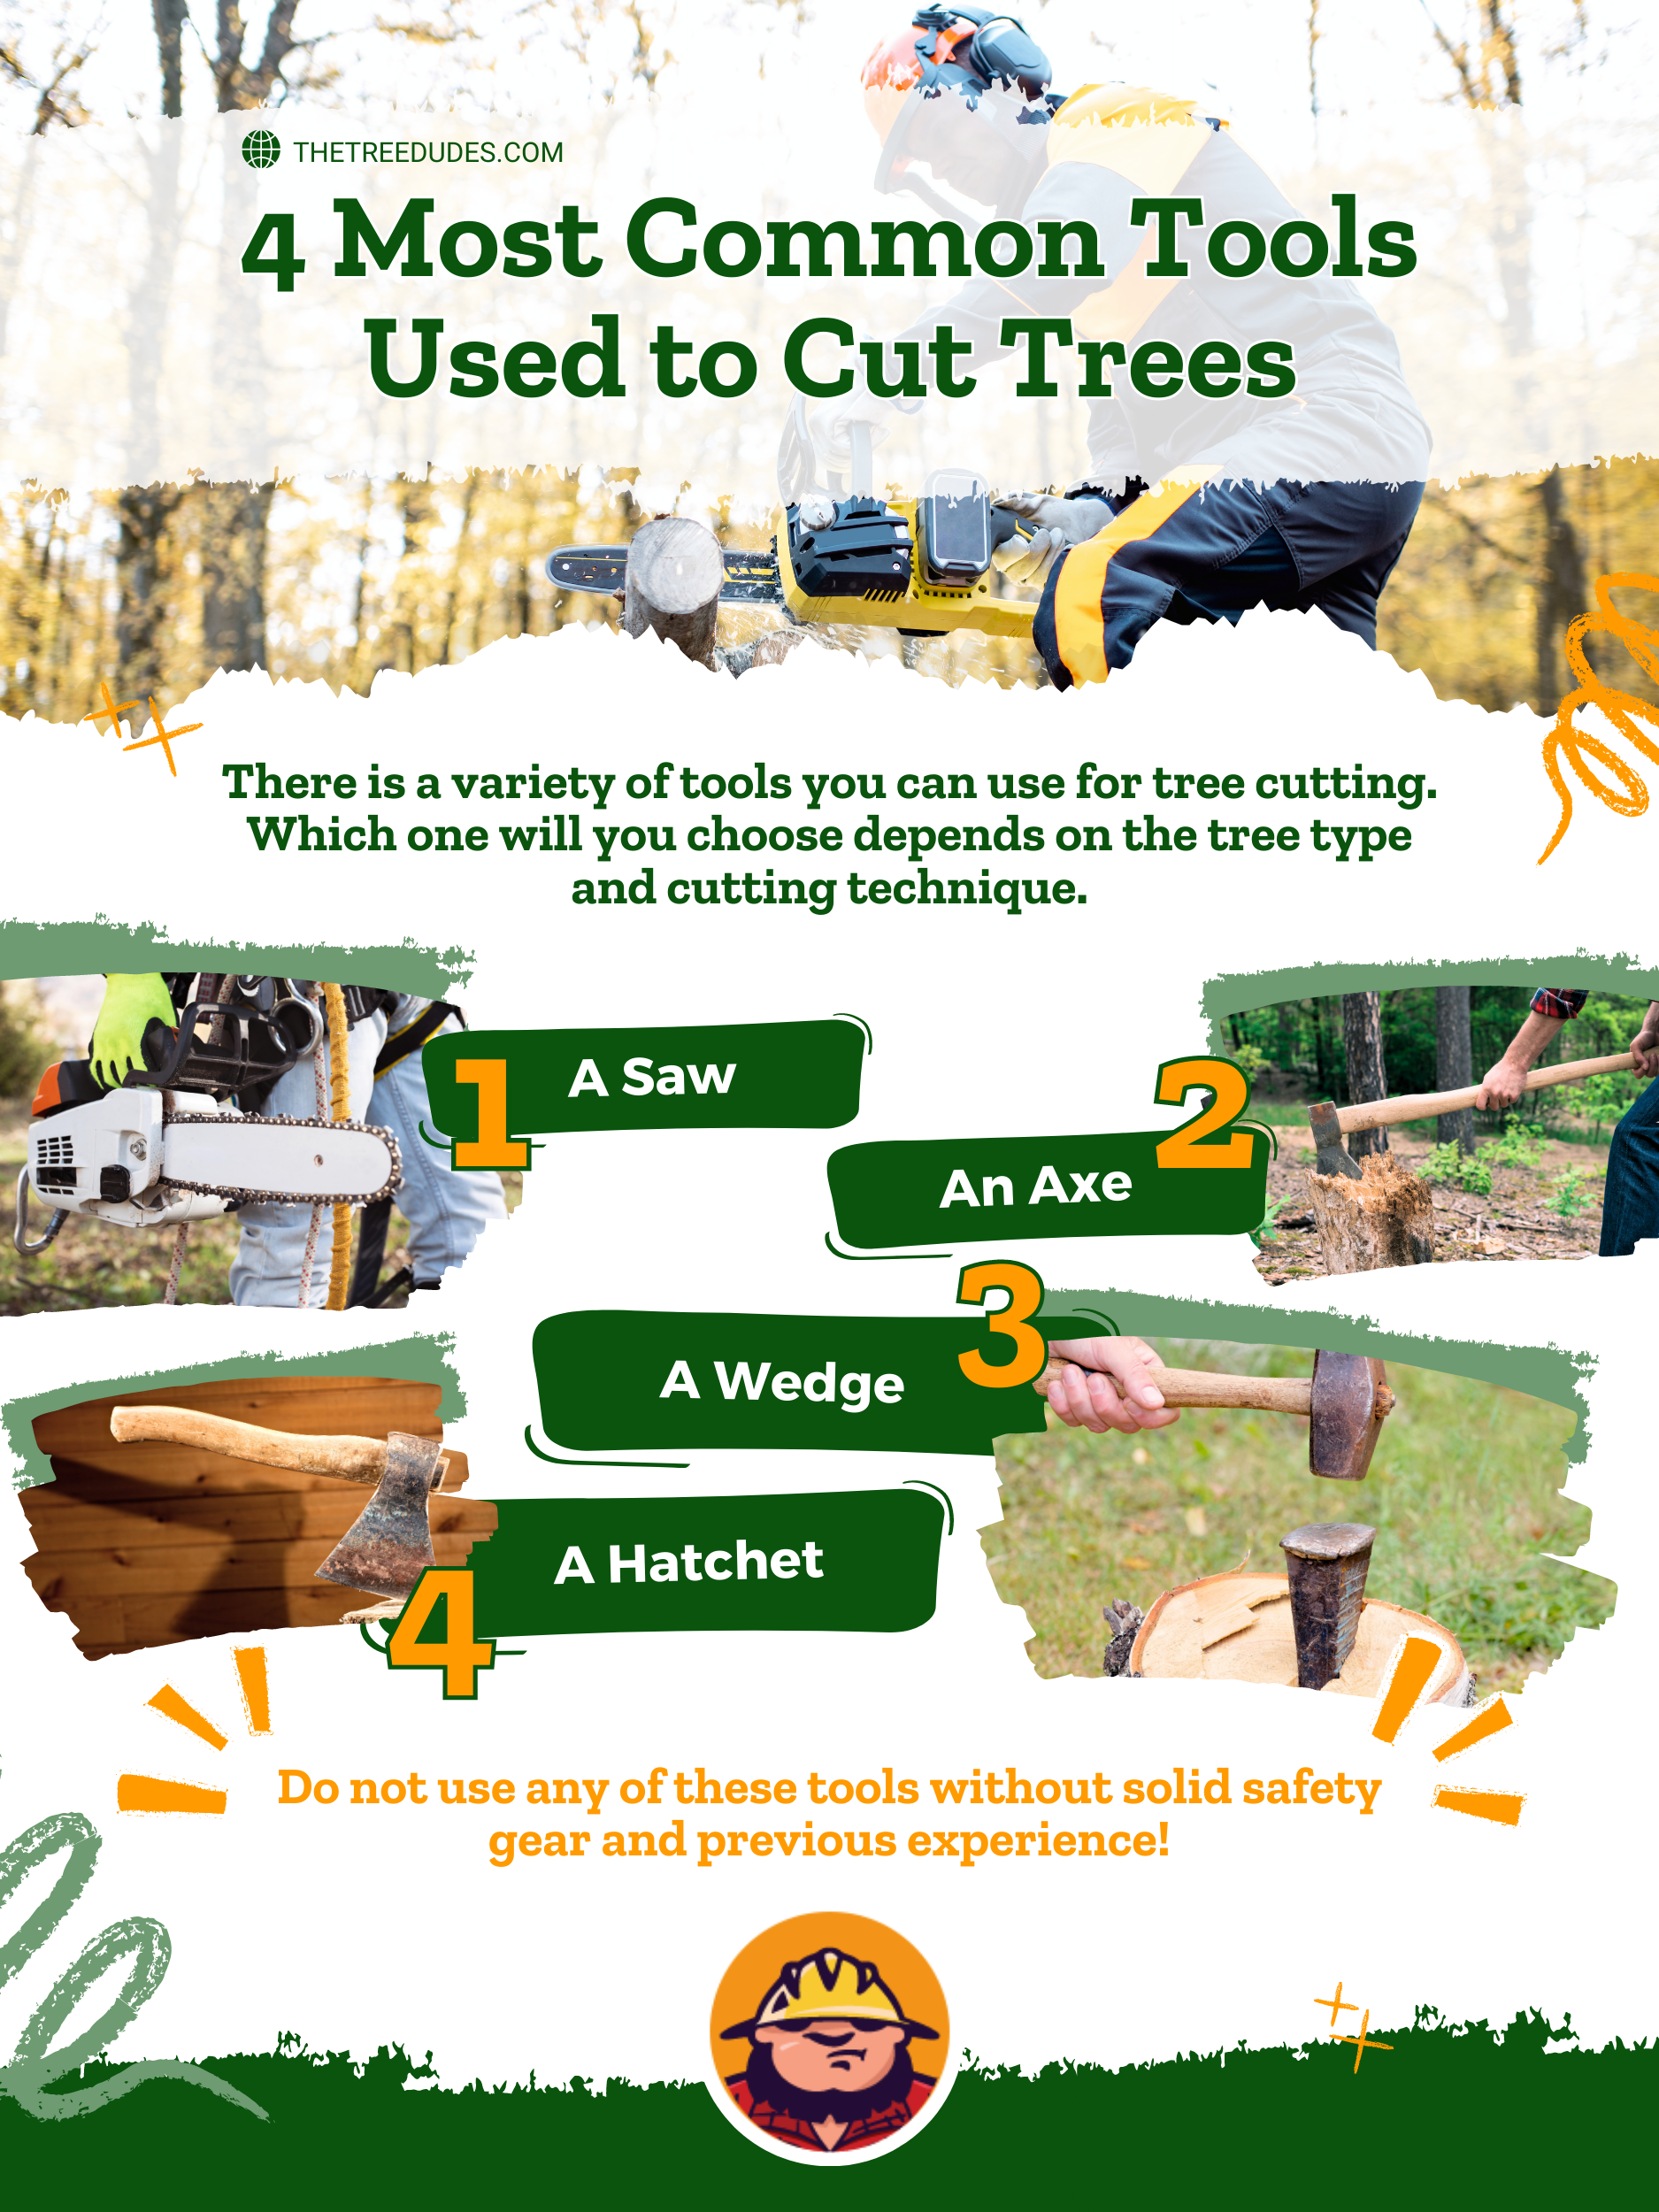 4 Most Common Tools Used to Cut Trees